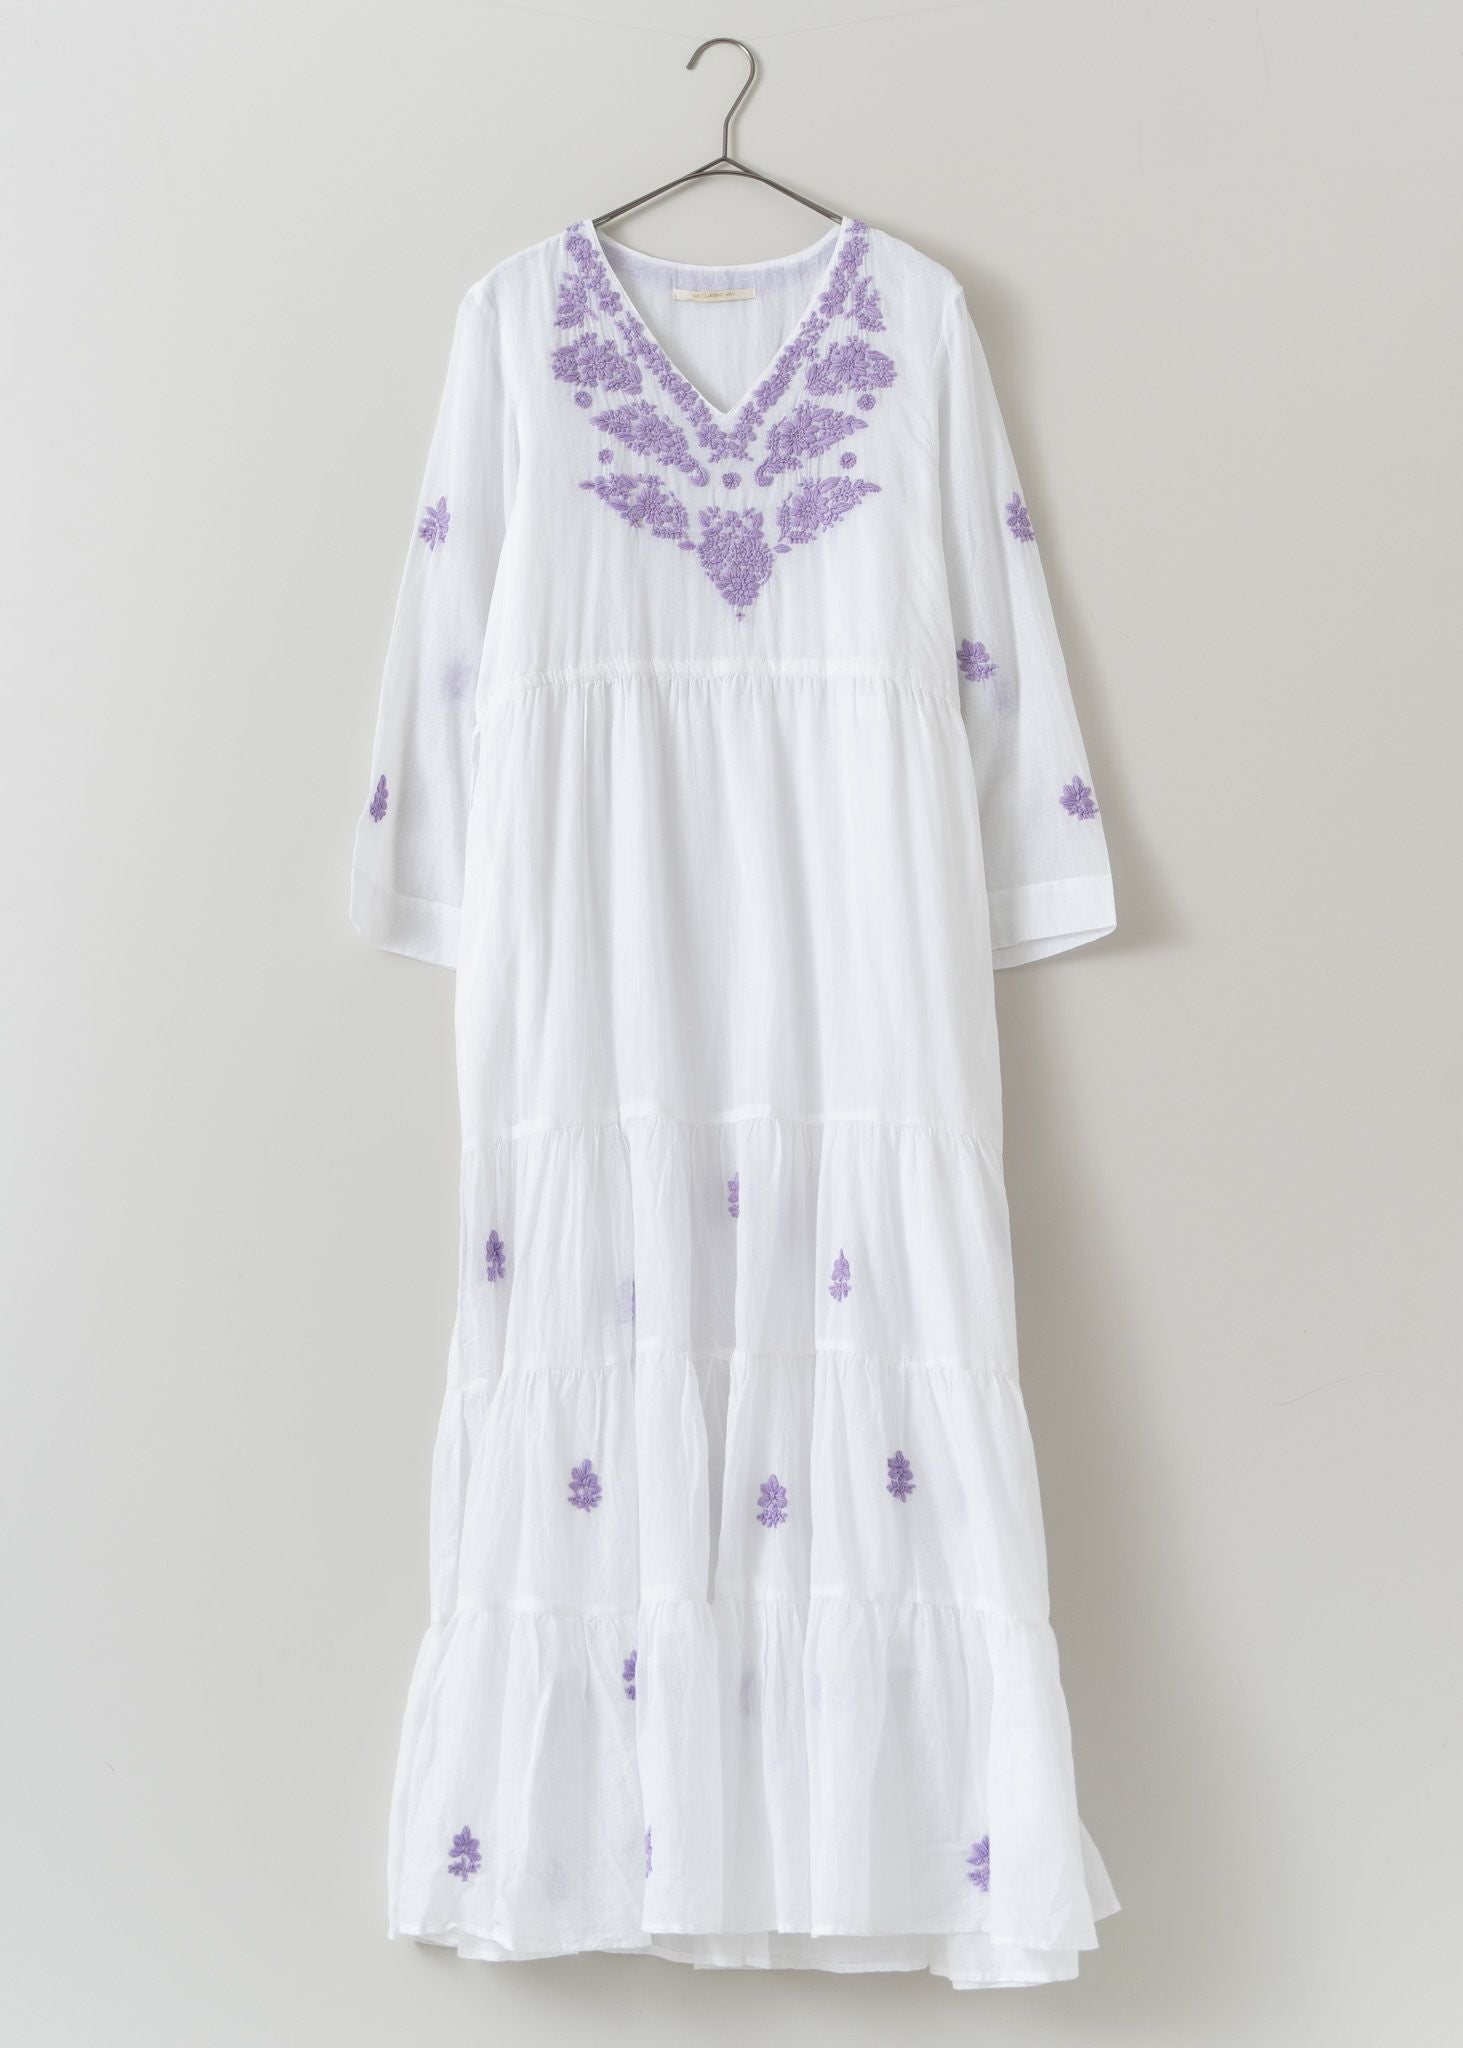 Cotton Chikan Embroidery V-Neck Dress